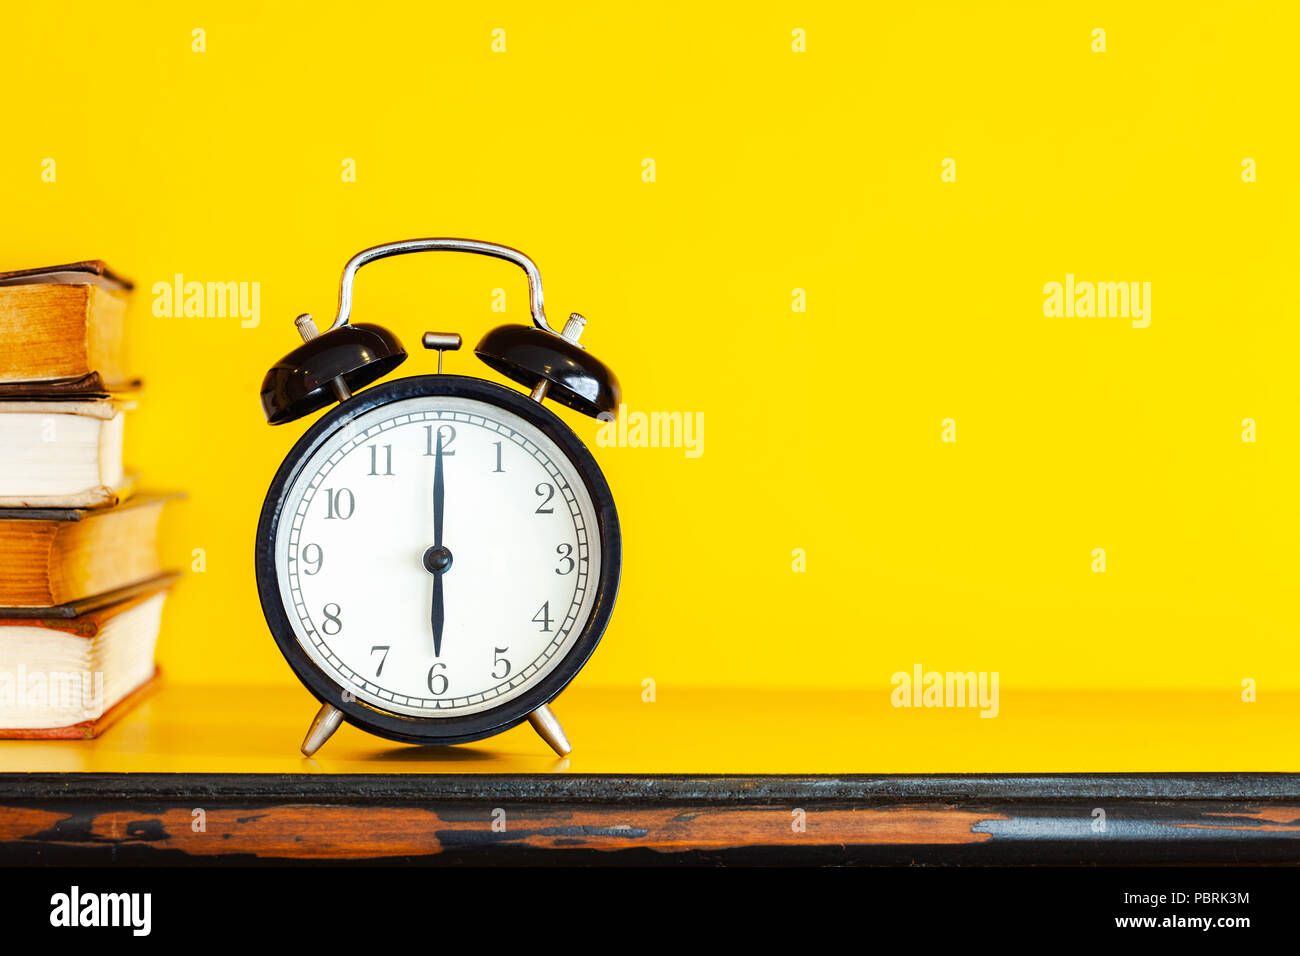 Alarm clock and book on yellow background with copy space. Stock Photo